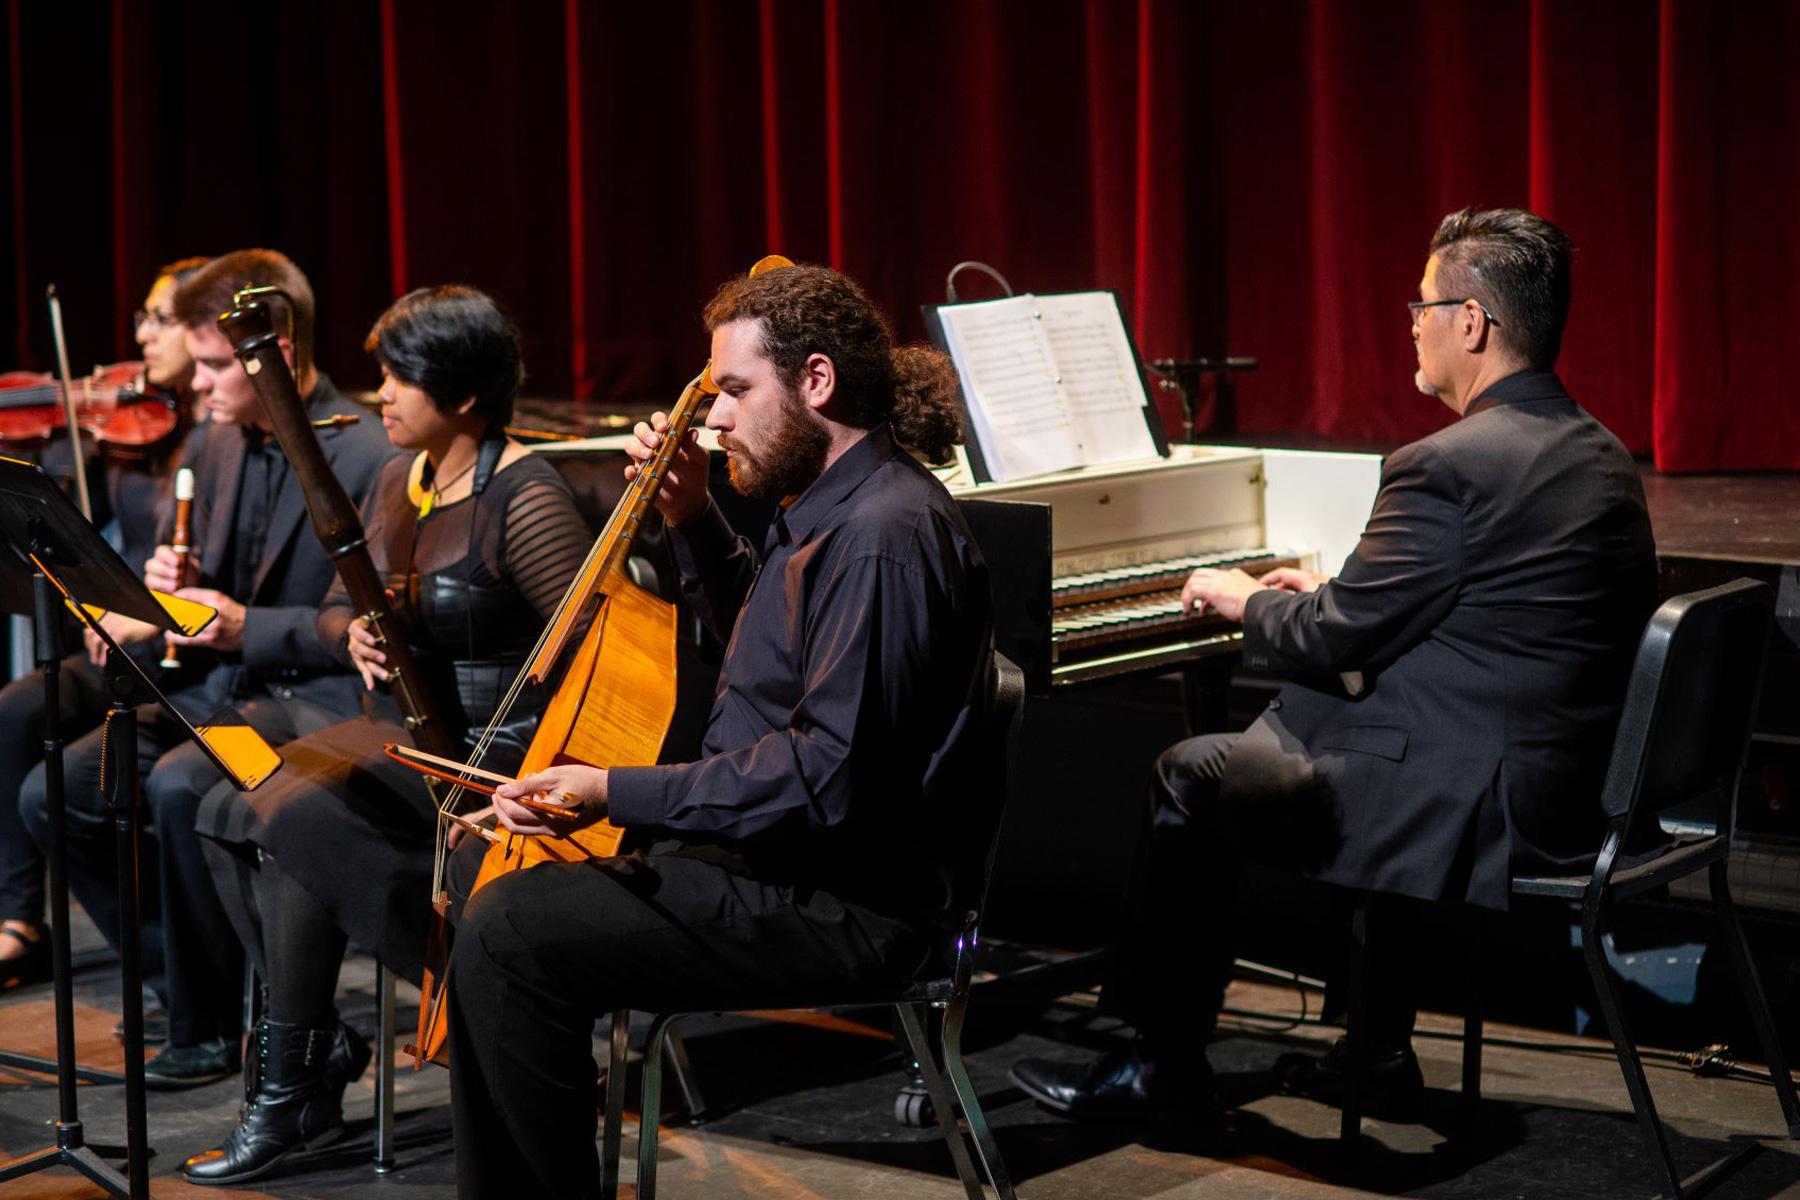 Music students performing in an auditorium.